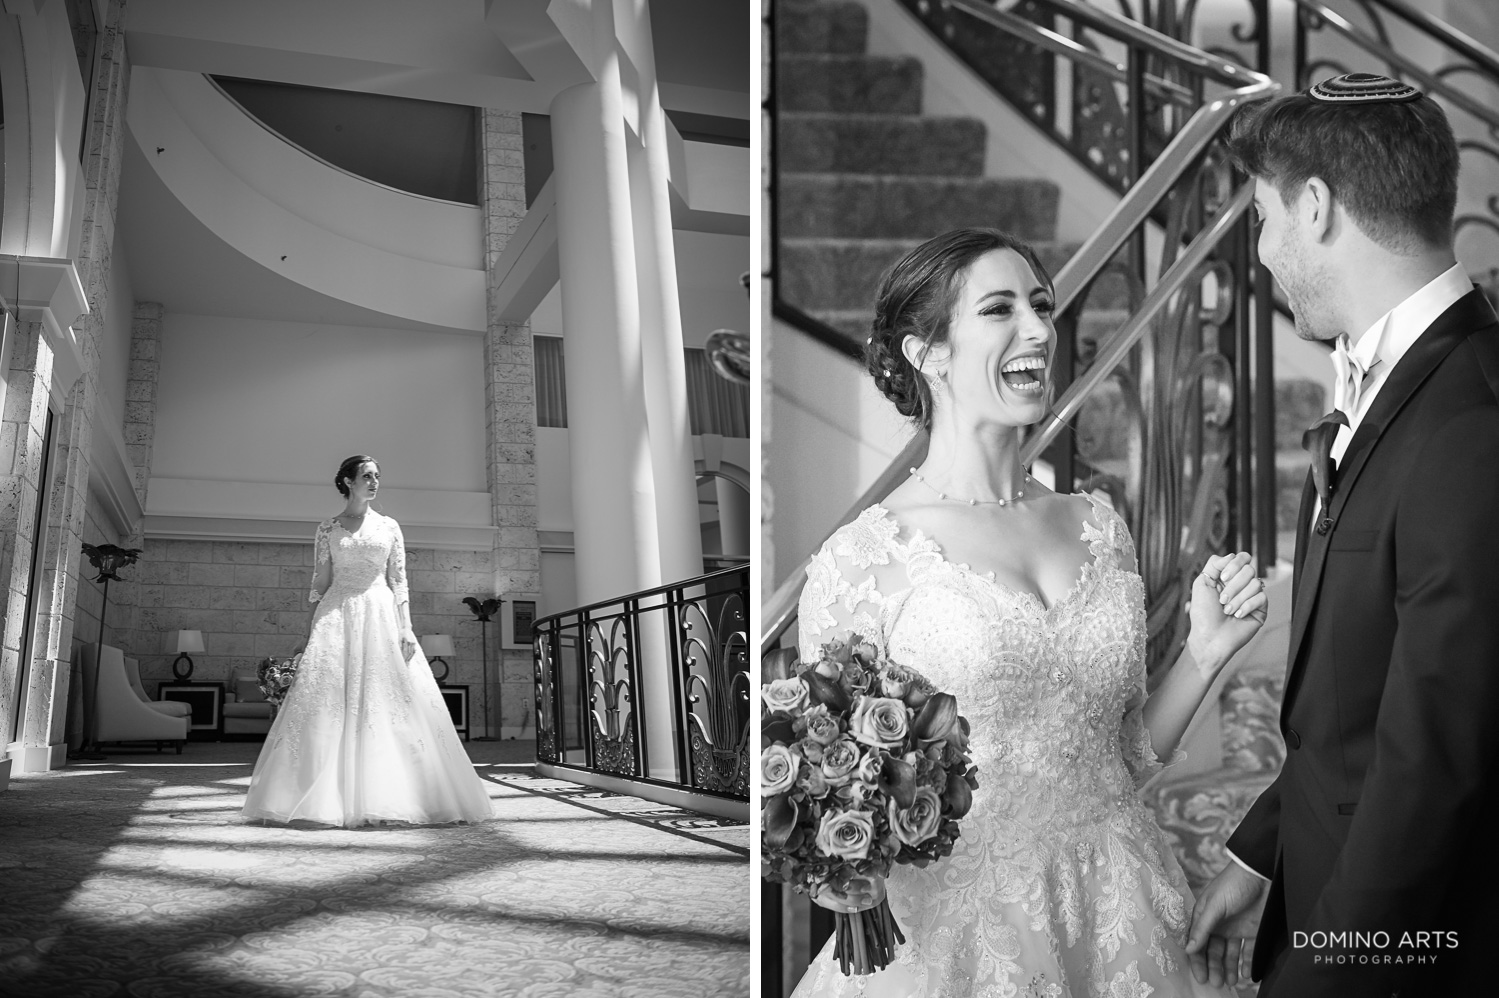 Fun and romantic wedding first look pictures at Trump national Doral in South Florida